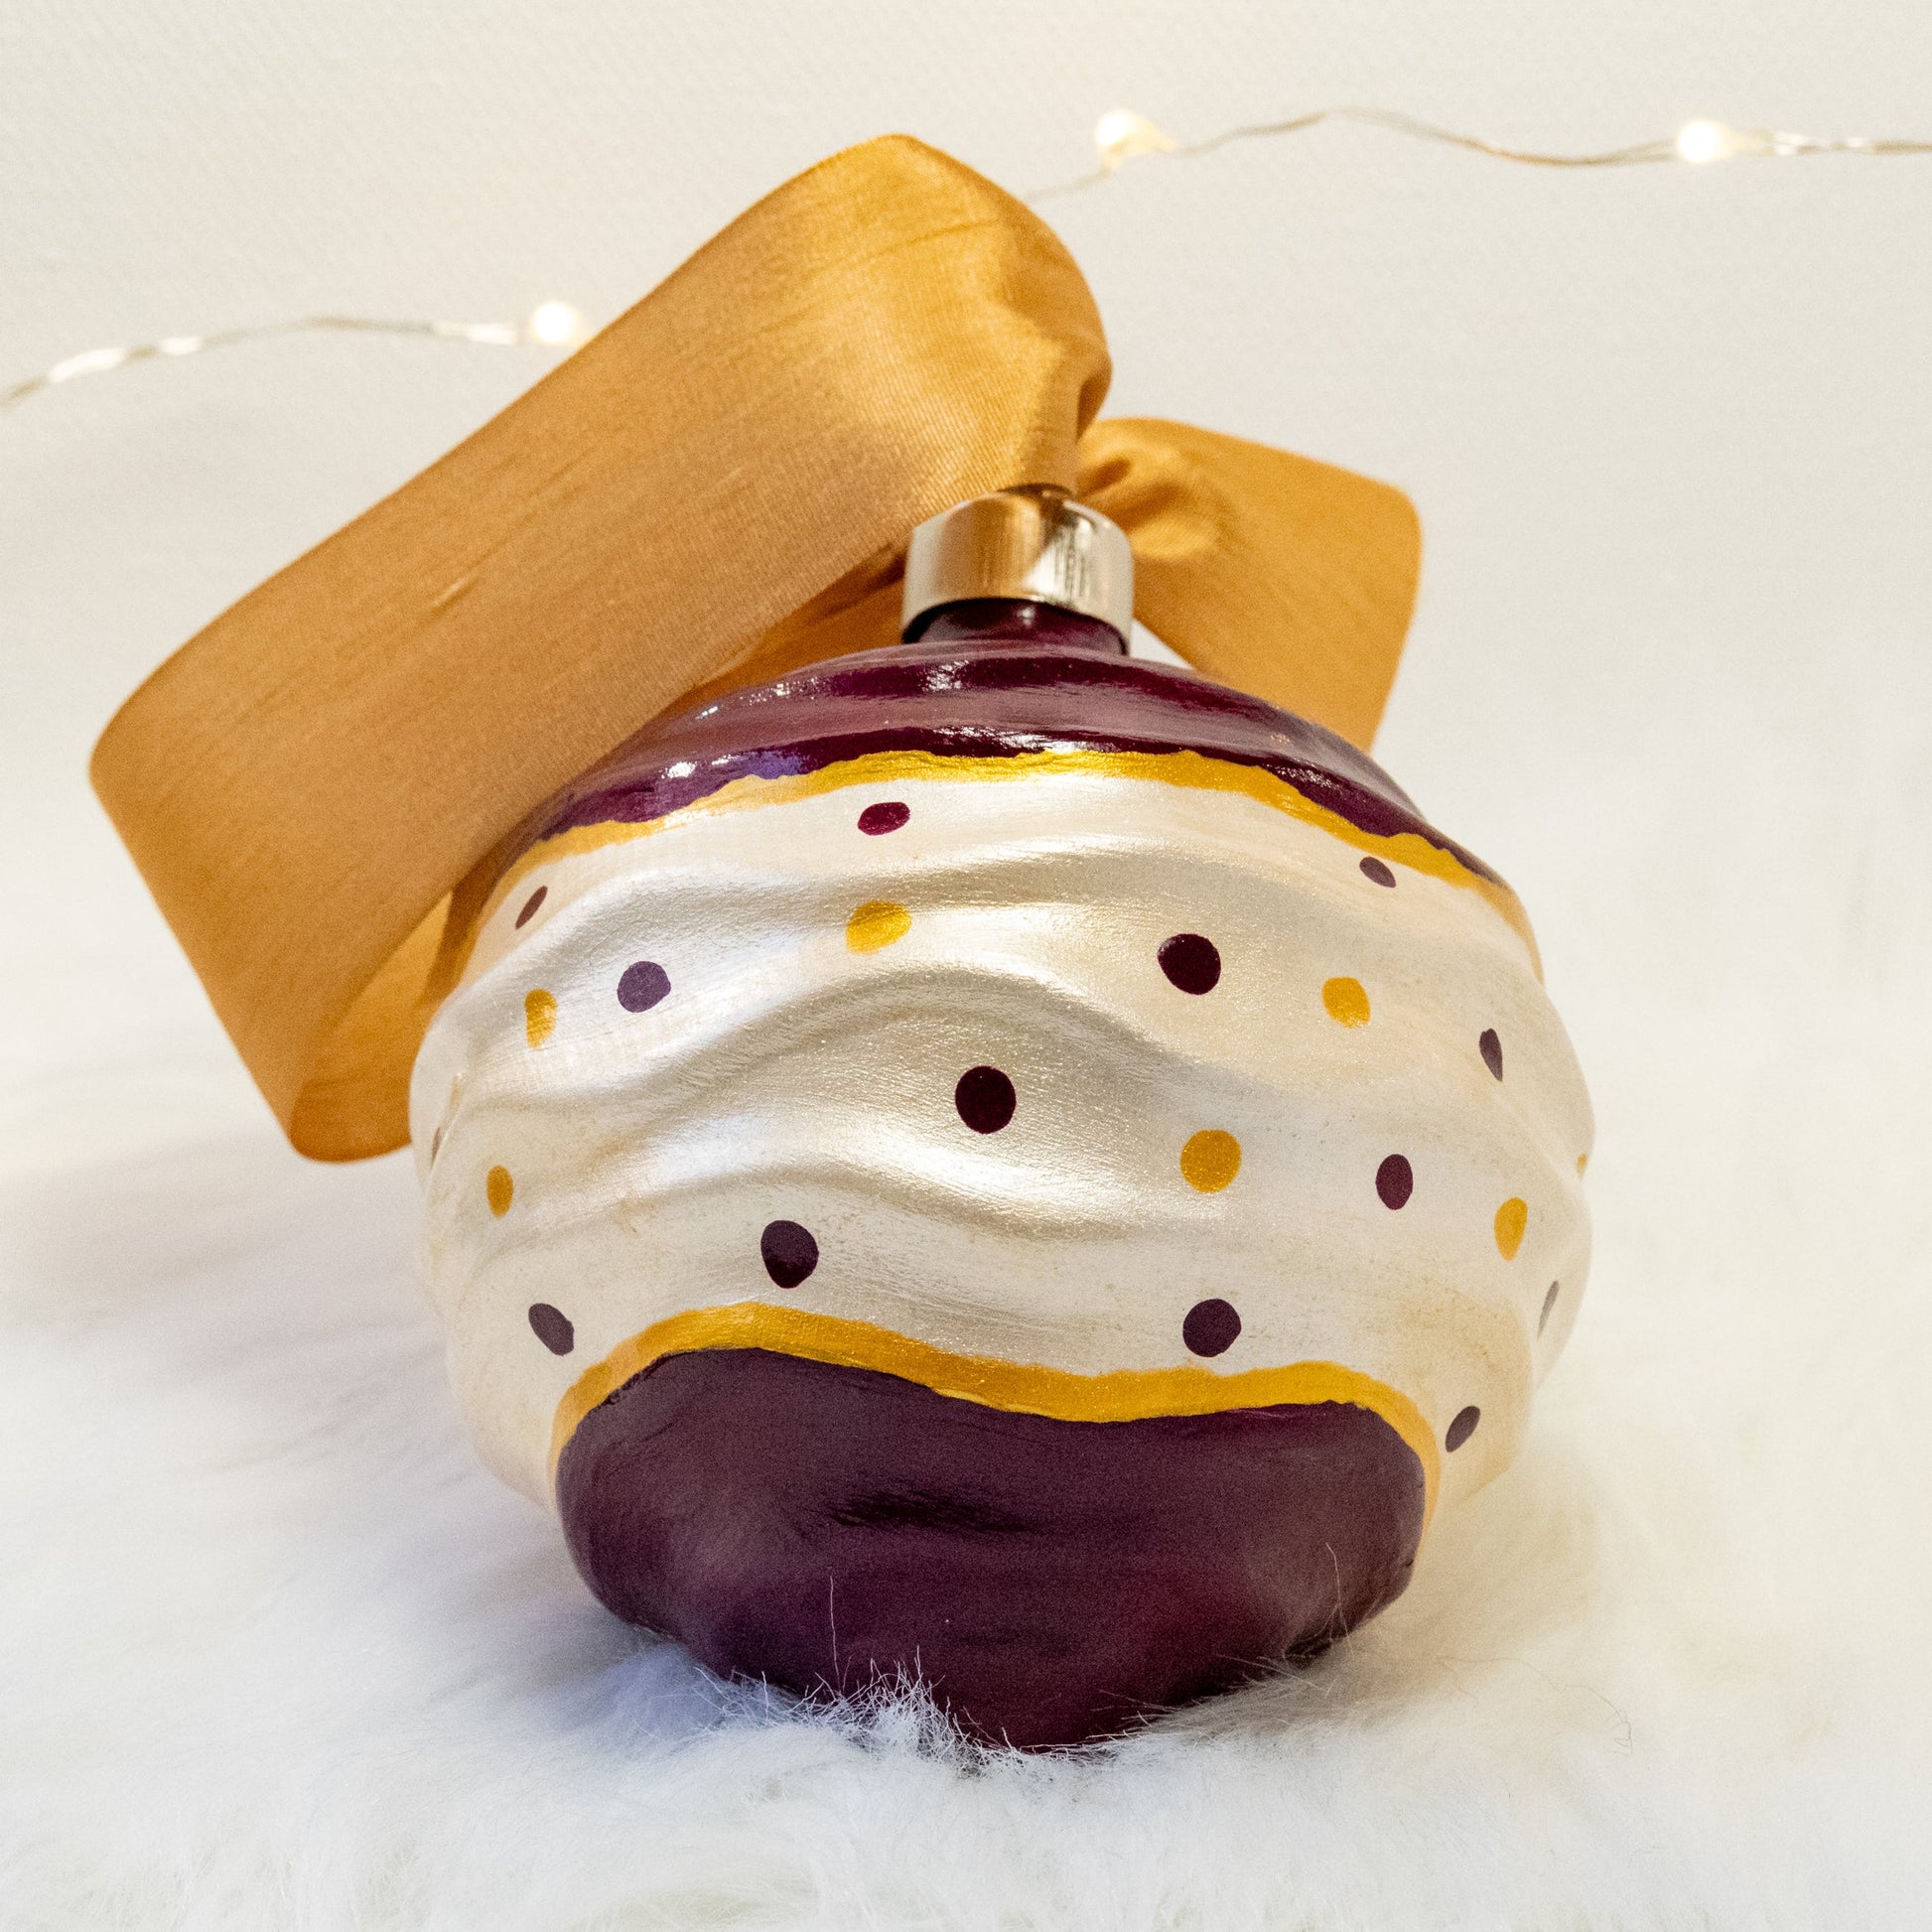 The Tracy Hand Painted Ornament features a white metallic and deep magenta base coat with deep magenta and gold polka dots and gold accents. Painted using fluid acrylic and acryla gouache paints. Displayed on white faux fur with fairy lights in the background.